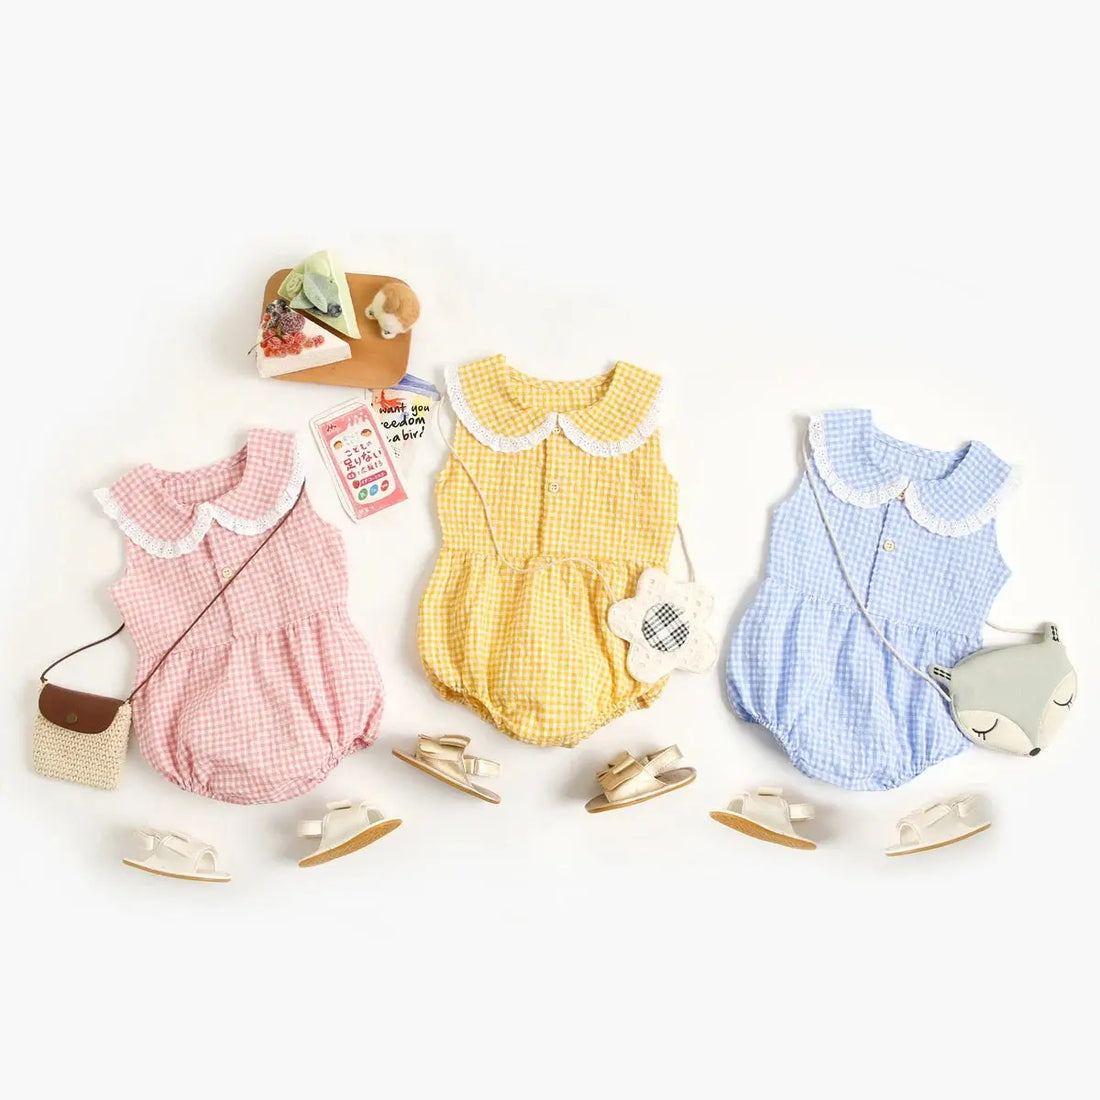 Three Spring &amp; Summer Baby Onesie outfits laid out, each with a onesie, shoes, and accessories, in pink, yellow, and blue colors by Soulful Trading.